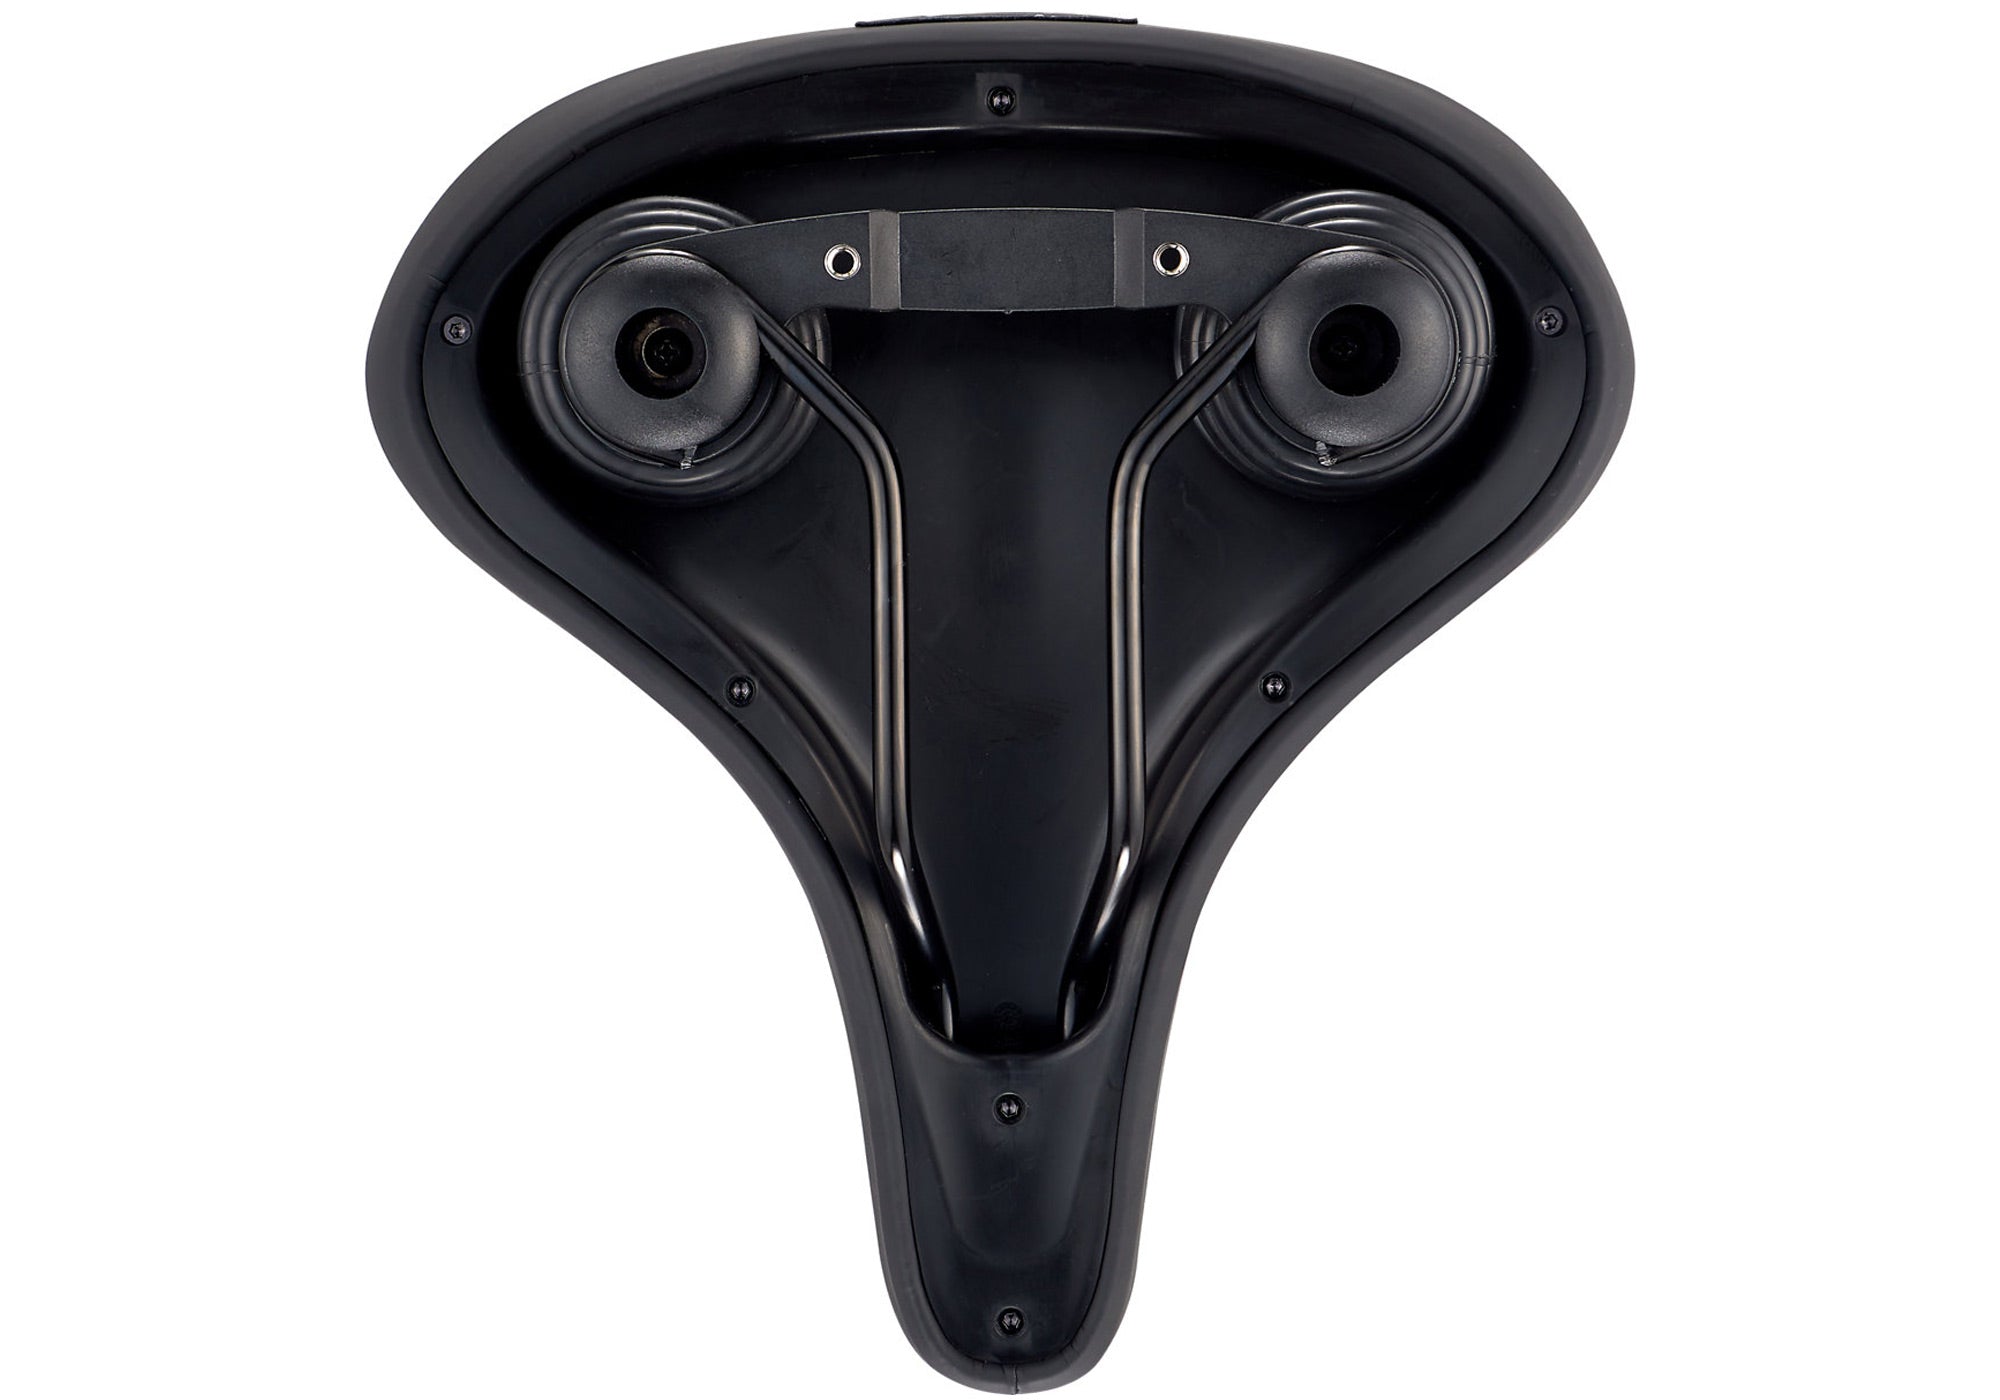 specialized the cup saddle